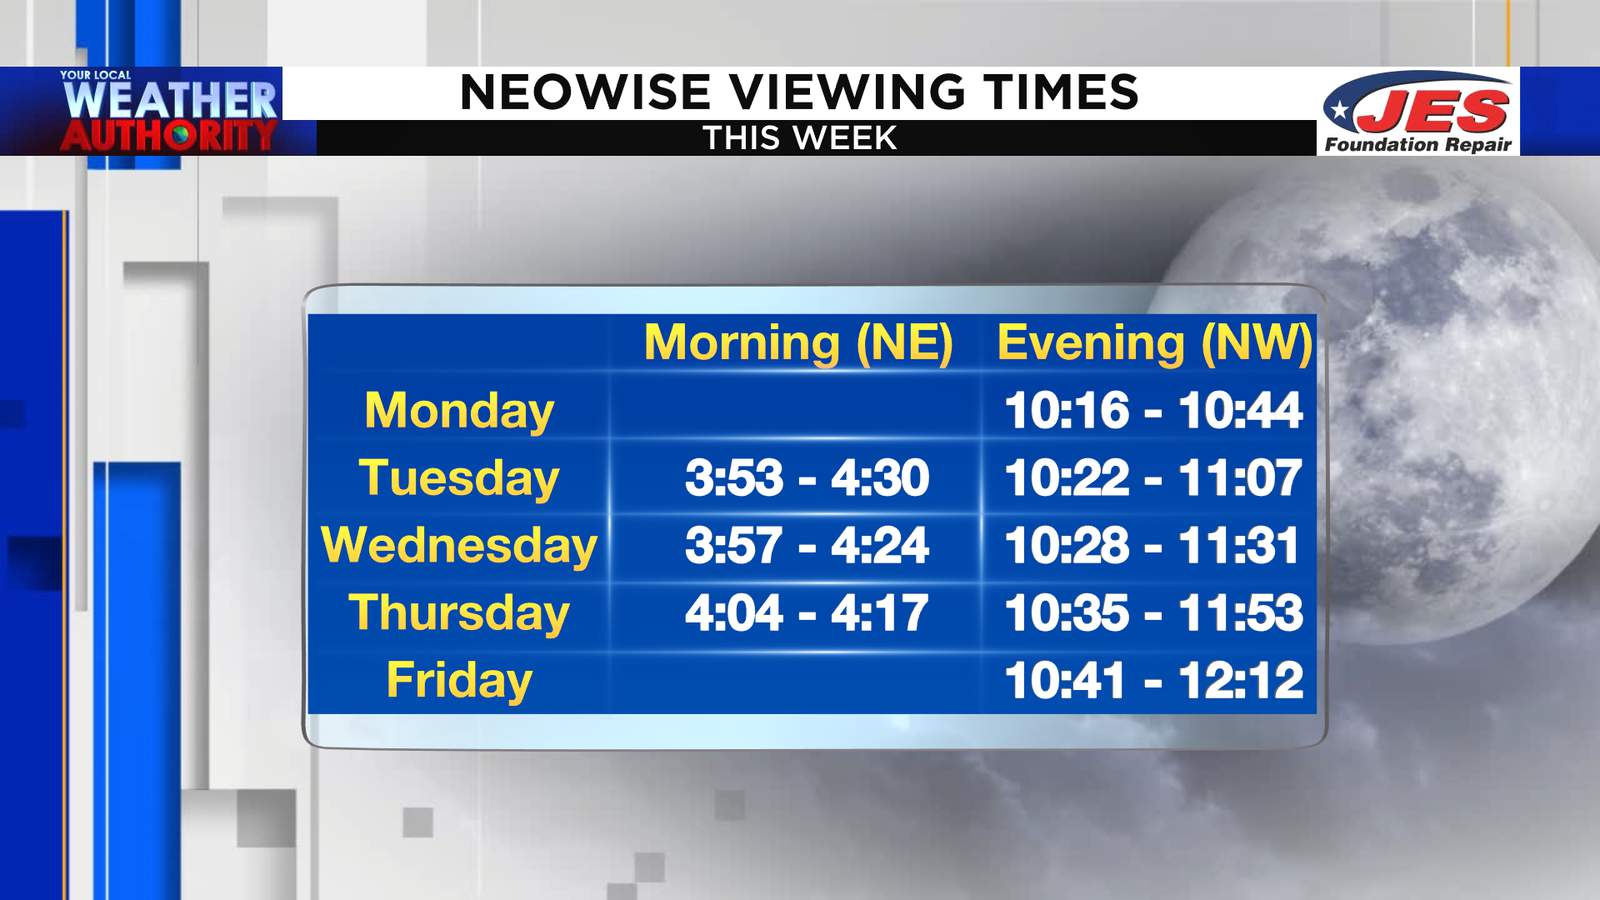 NEOWISE appears *twice* a day; when and where to look